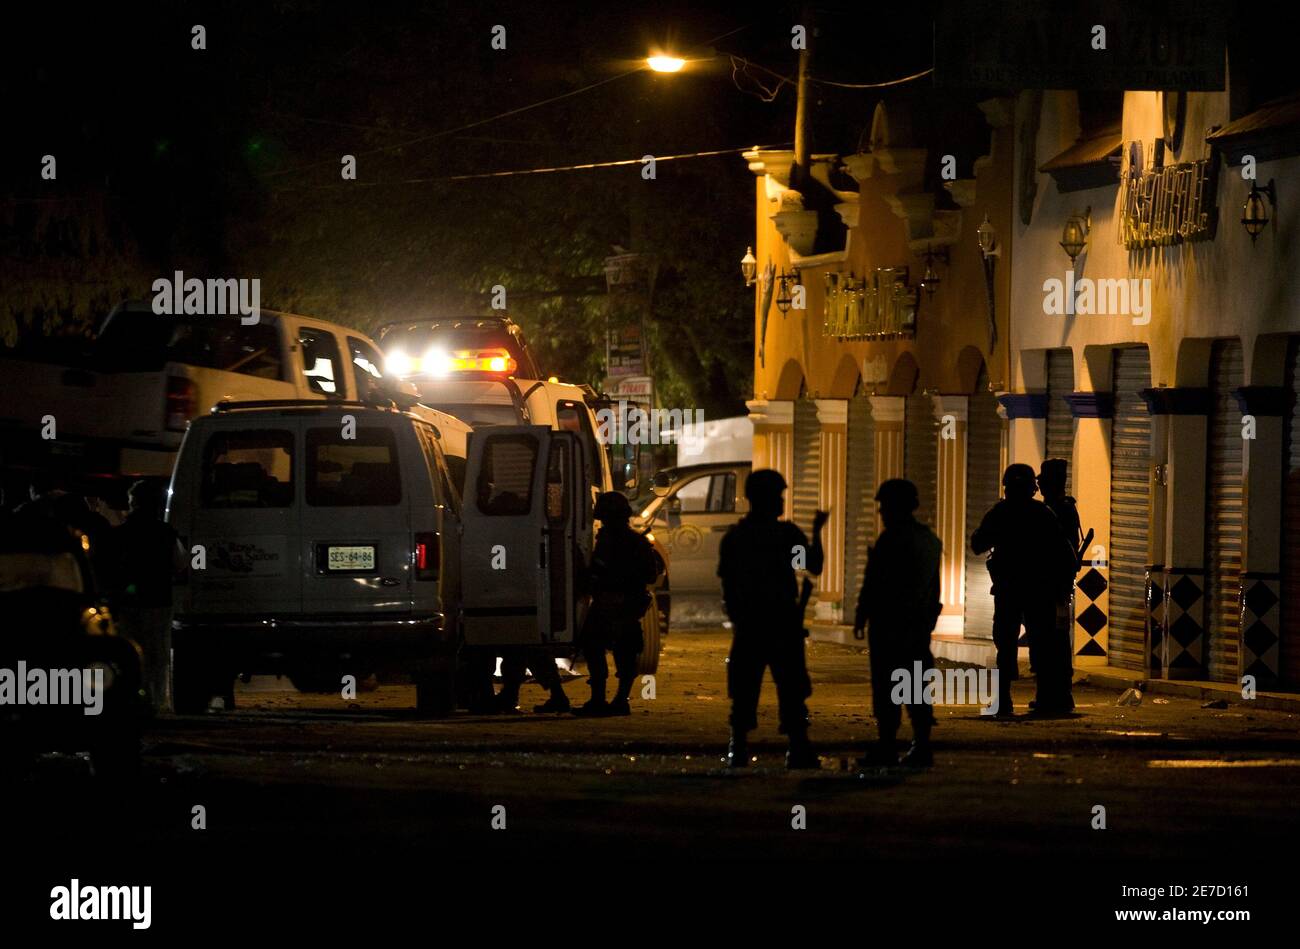 Soldiers inspect a crime scene where six men were killed after a shooting at the touristic area of La Boca dam, in the municipality of Santiago, some 20 miles (32 km) away from  Monterrey, northern Mexico September 5, 2009. A confrontation early Saturday between gunmen and the military left six people dead and five injured, according to local media. REUTERS/Tomas Bravo (MEXICO CONFLICT CRIME LAW MILITARY) Stock Photo